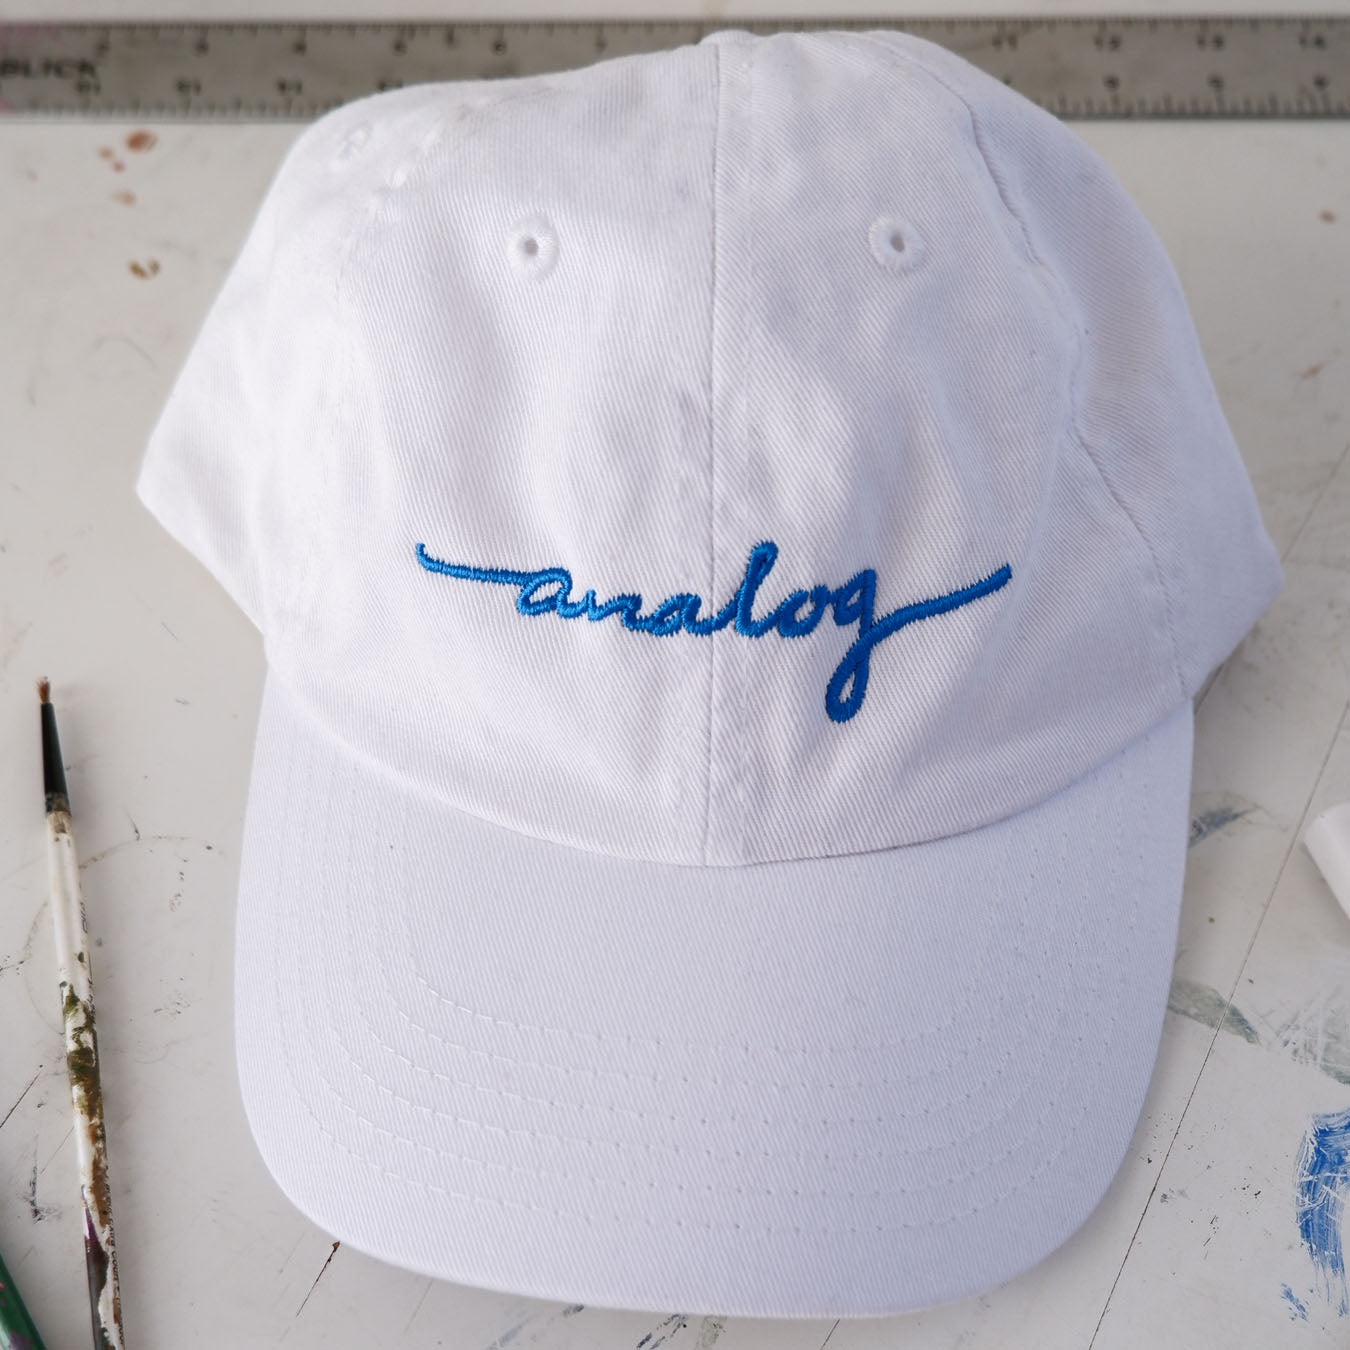 An Analog Hat with blue writing on it.